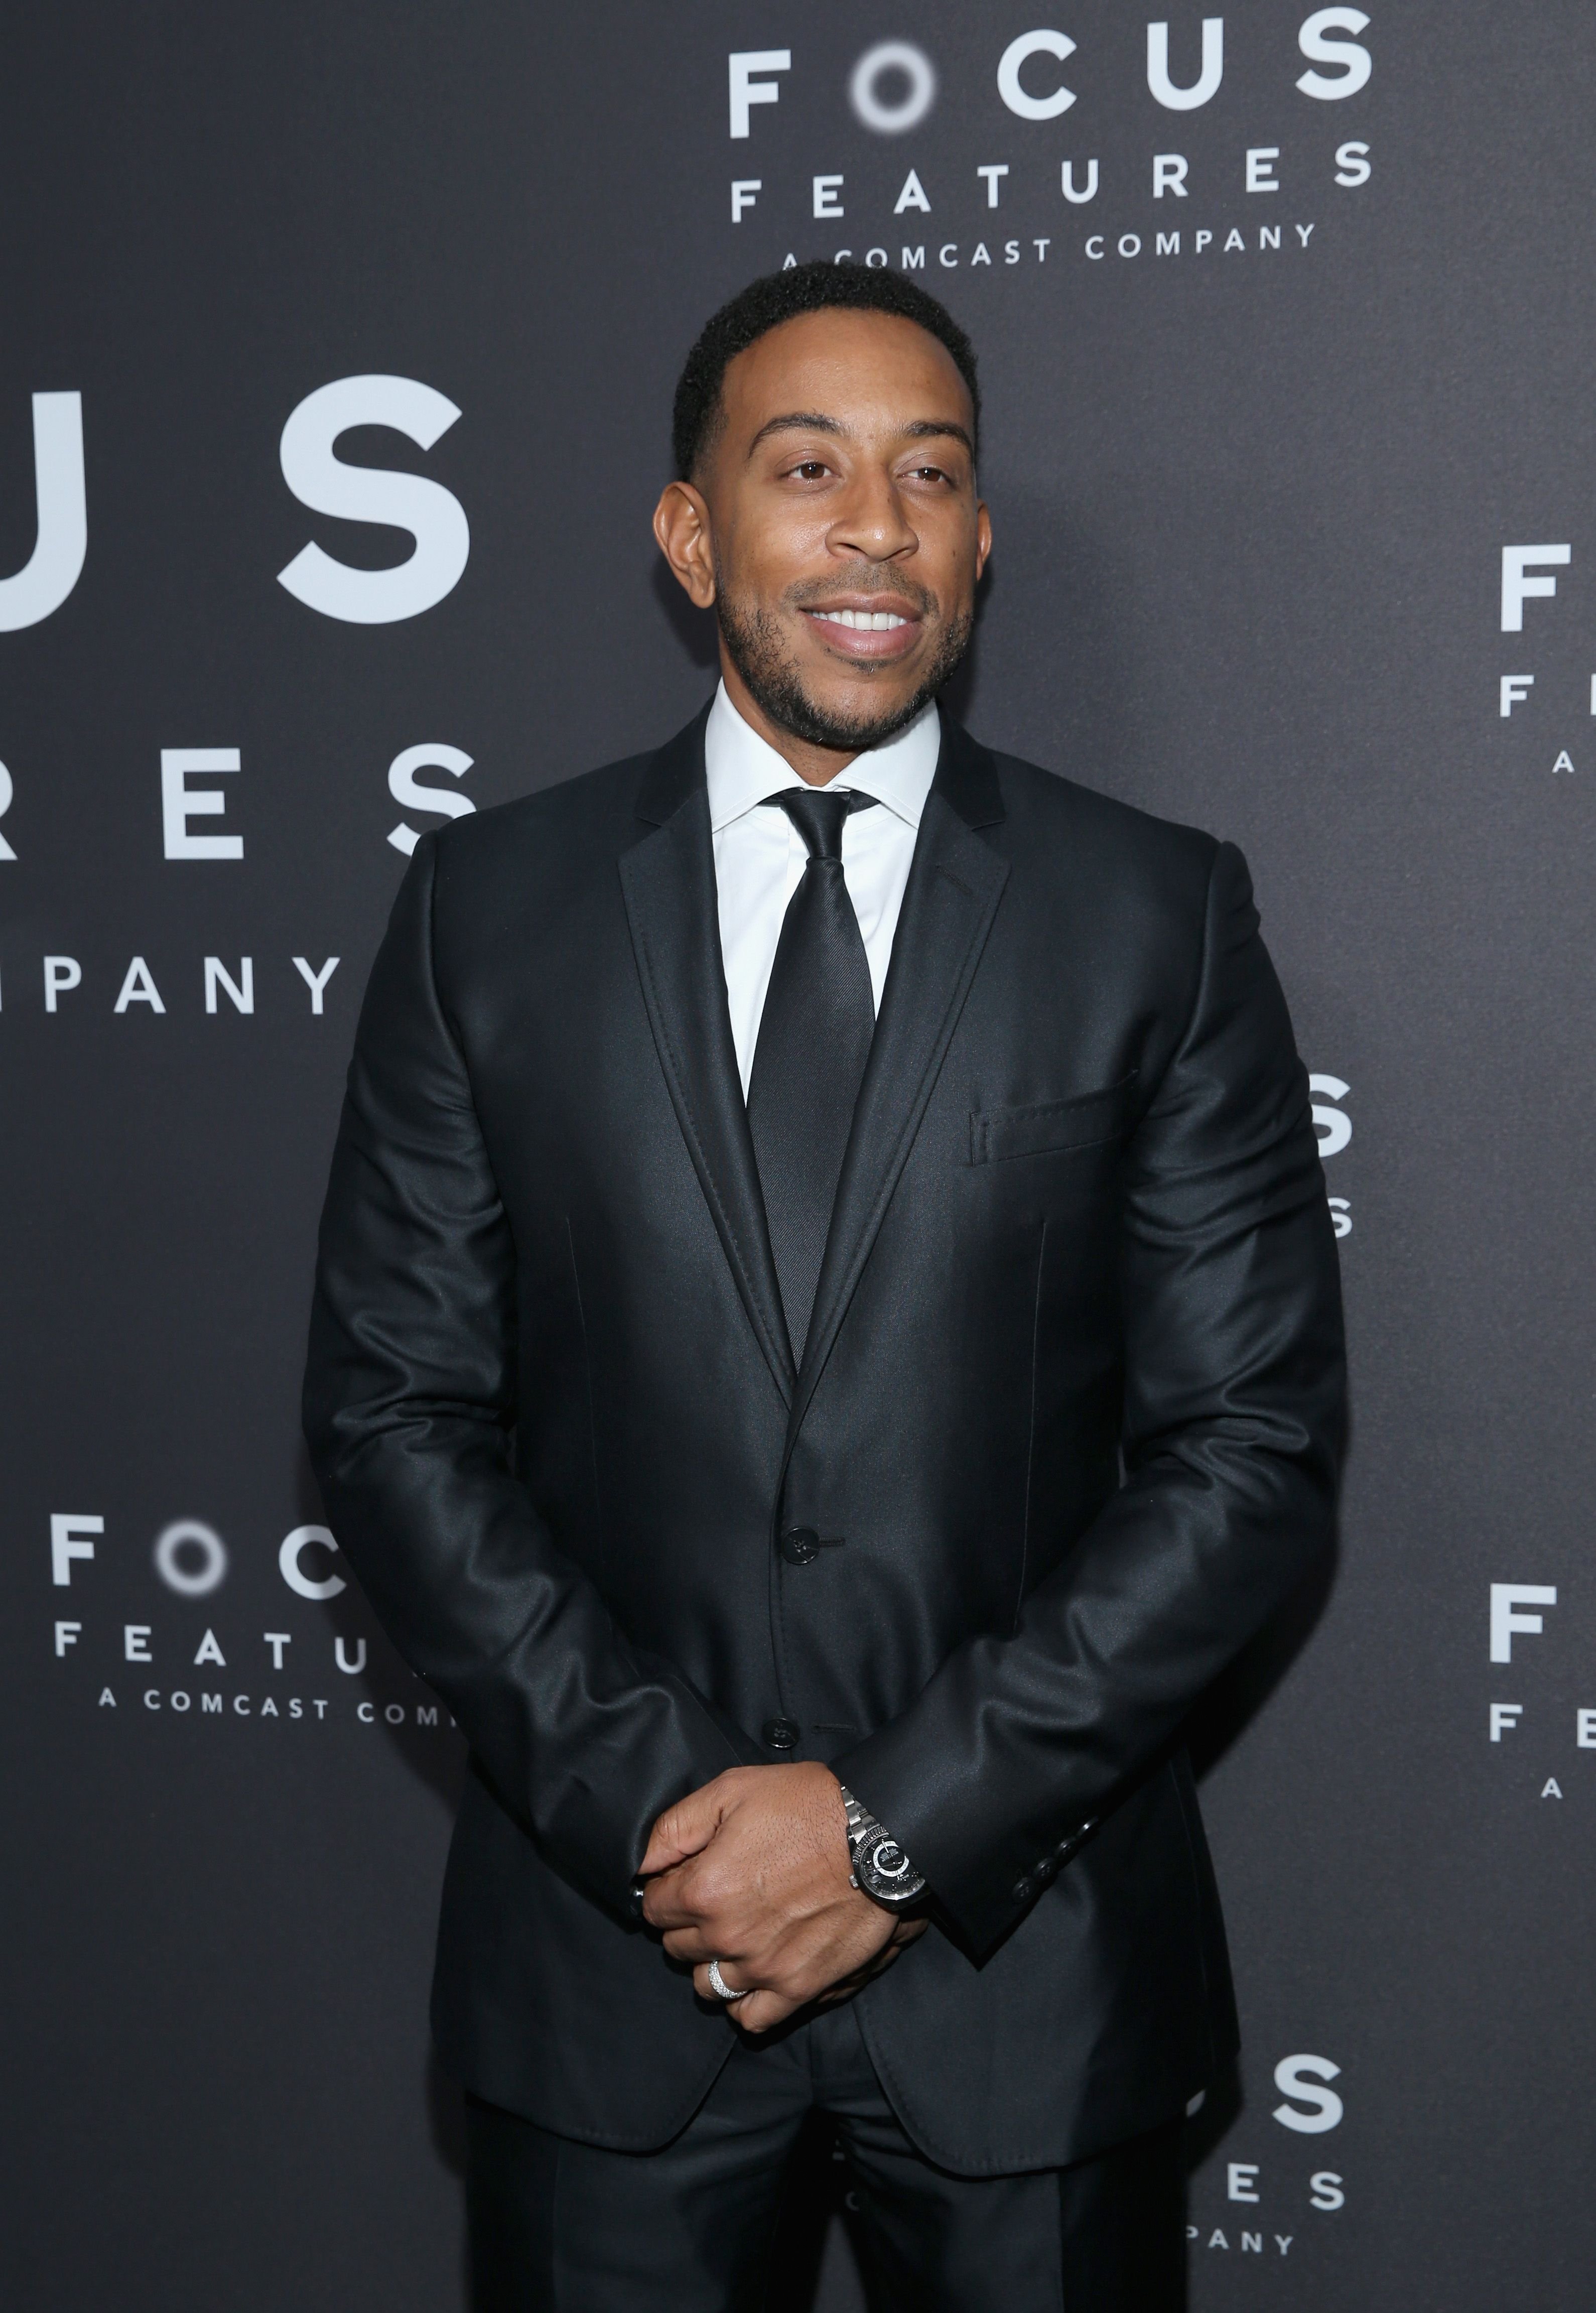 Actor-rapper Ludacris attends Focus Features' Golden Globes after party in January 2017. | Photo: Getty Images